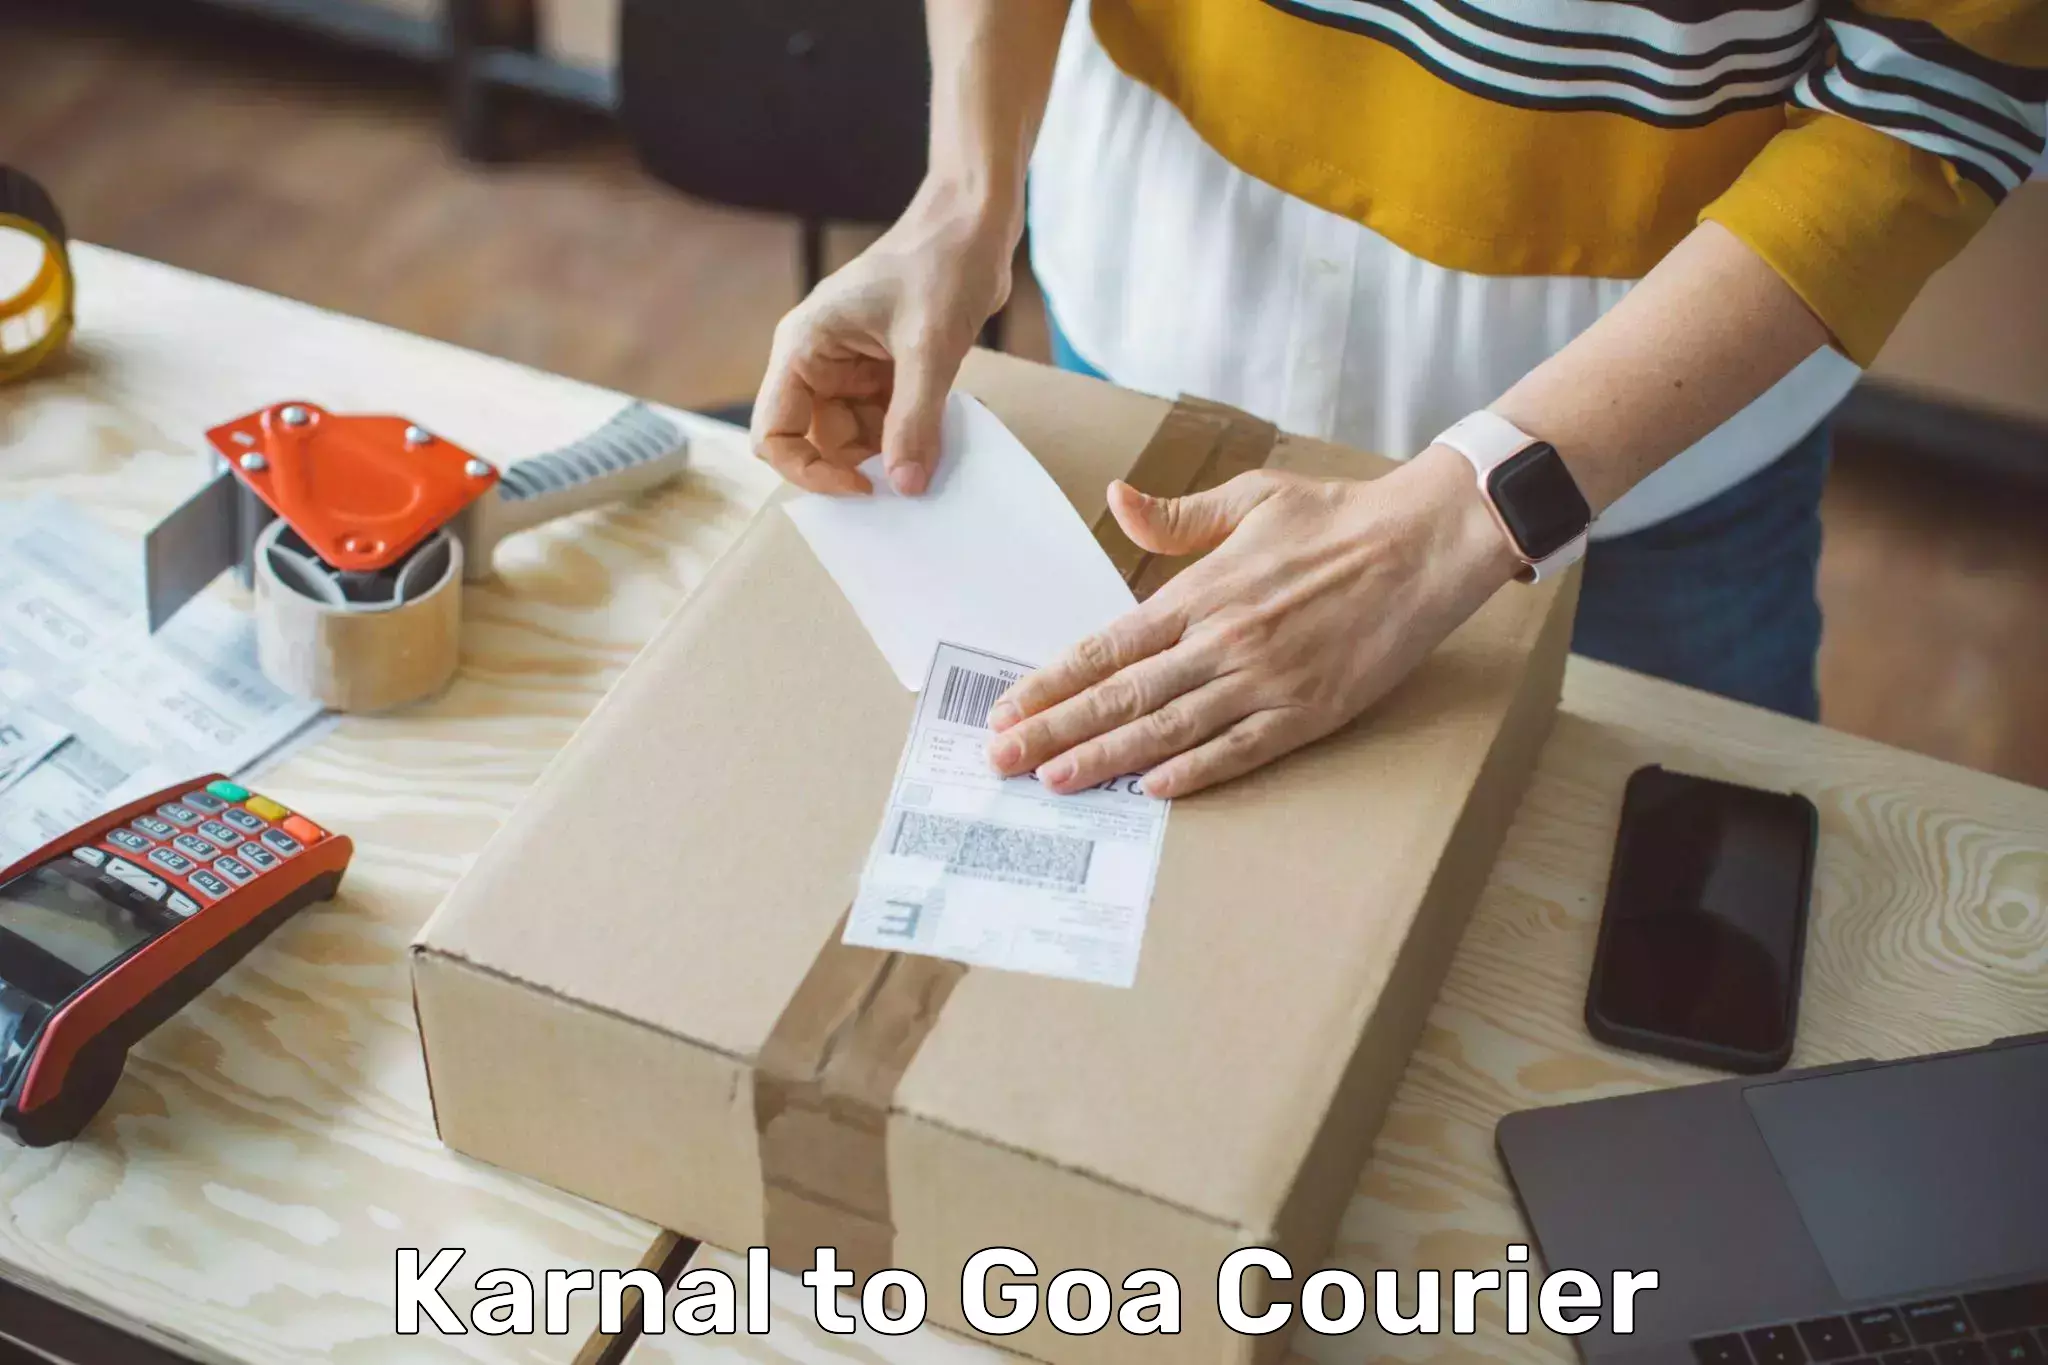 Fast delivery service Karnal to Panjim